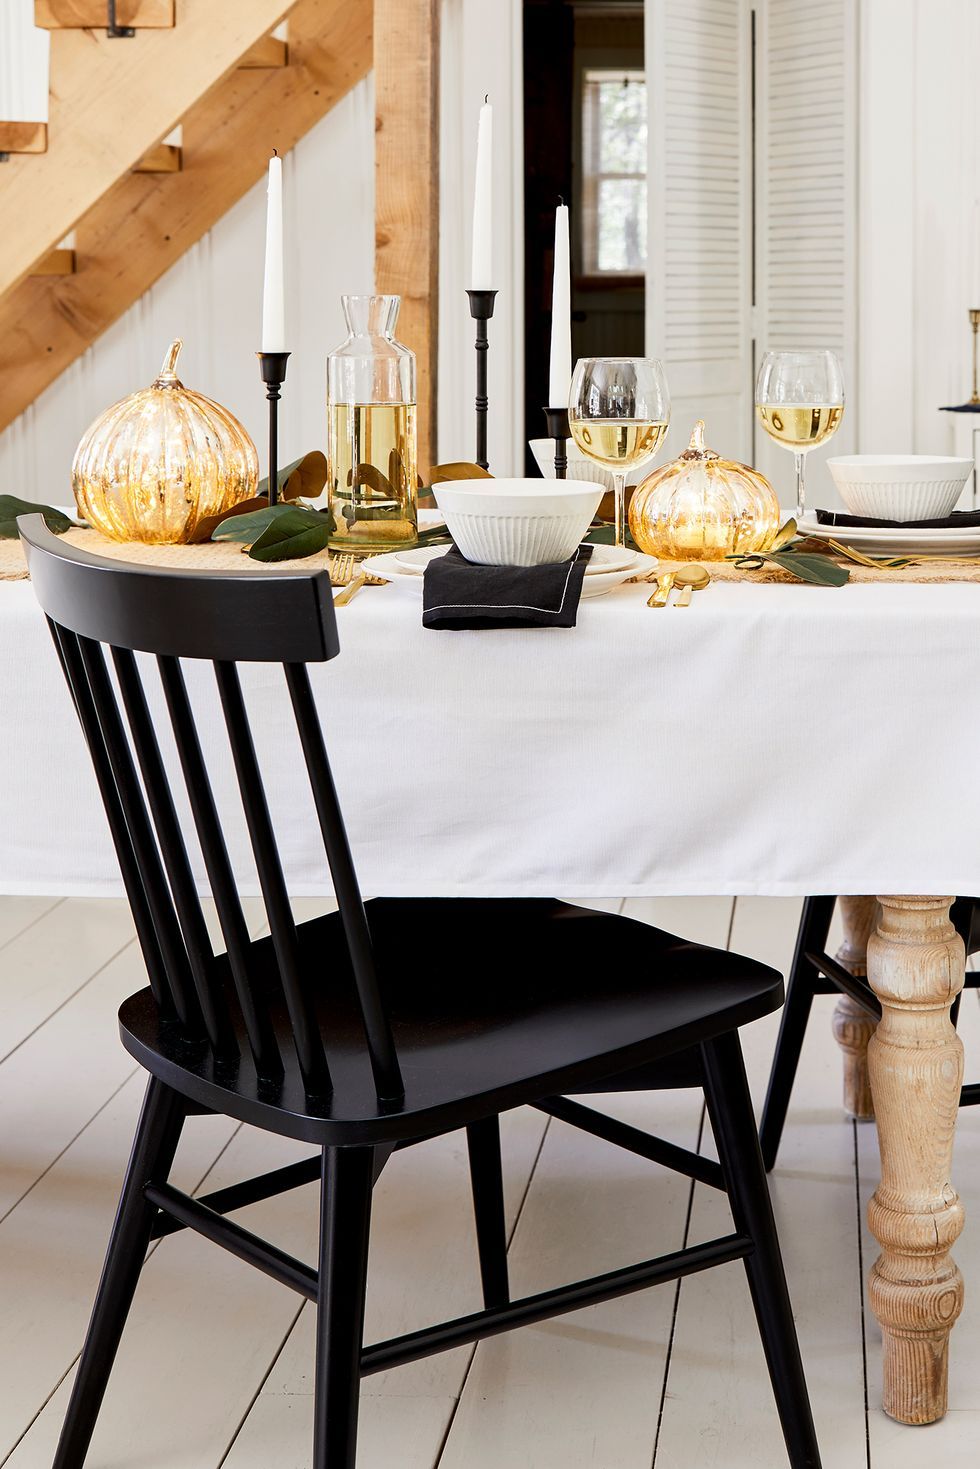 18 Fall Table Decorations   Ideas for Autumn Tablescapes